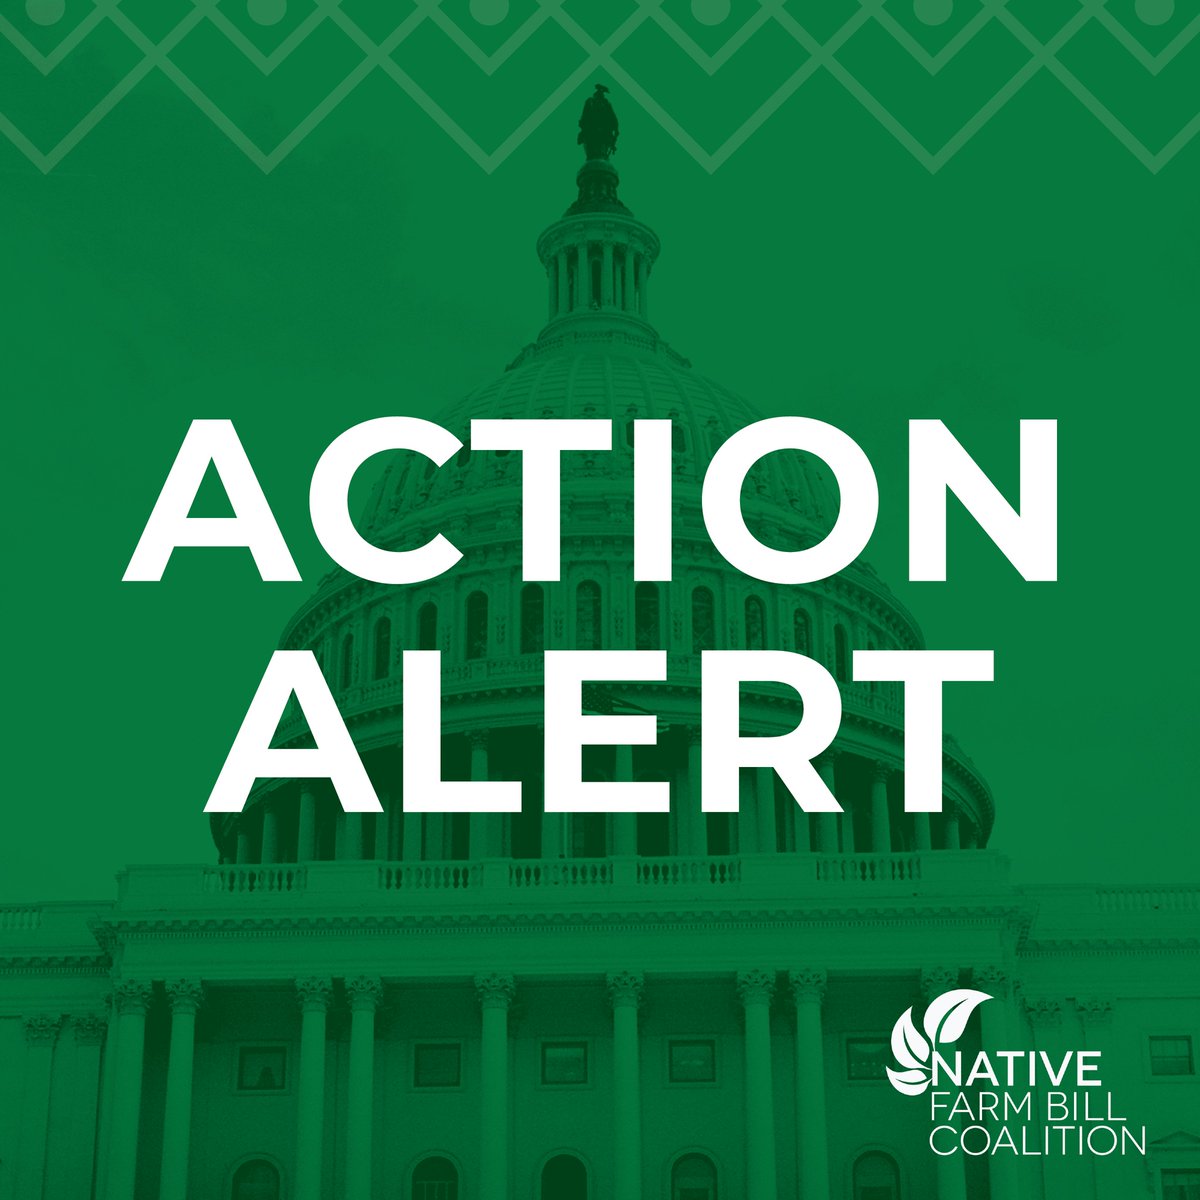 Indian Country: We need your support! This Friday is the deadline to send letters to the USDA urging them to support the expansion of the 638 authority in the upcoming Farm Bill. Learn more and submit your letter: nativefarmbill.com/action-alerts